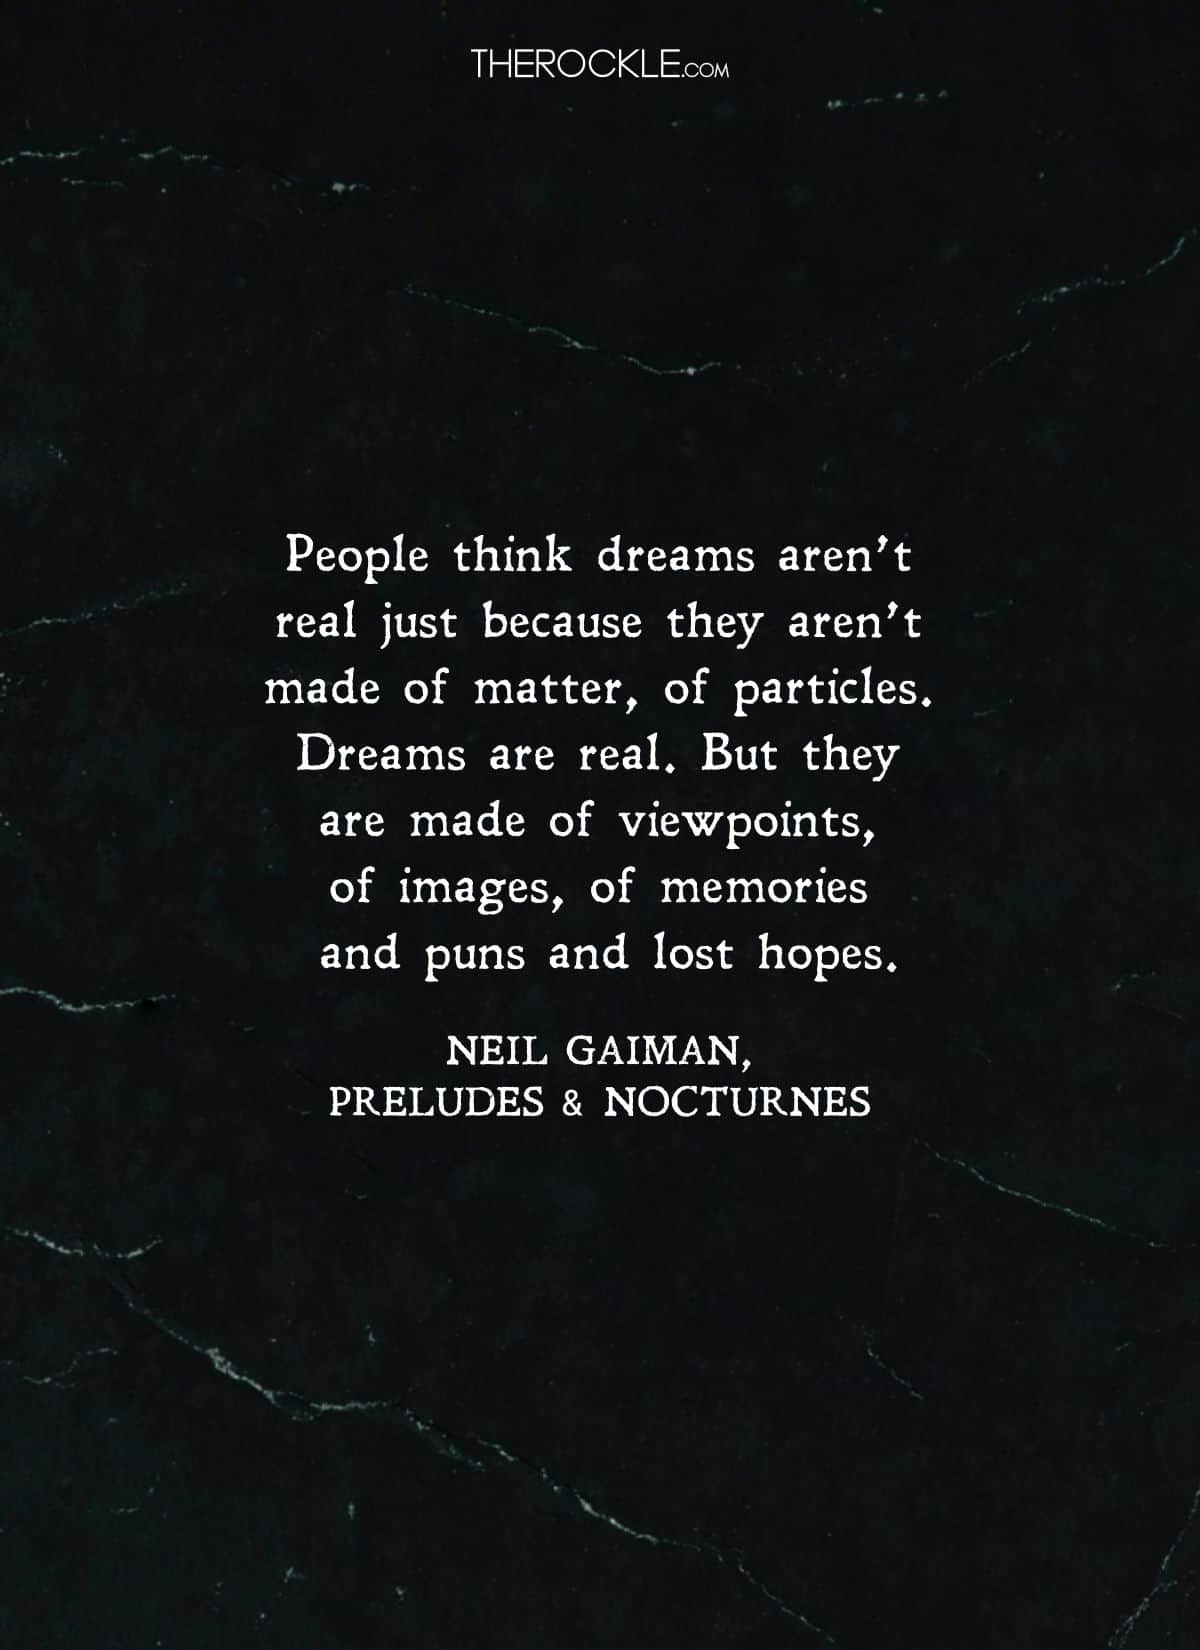 Quote about dreams and abstract reality by Neil Gaiman